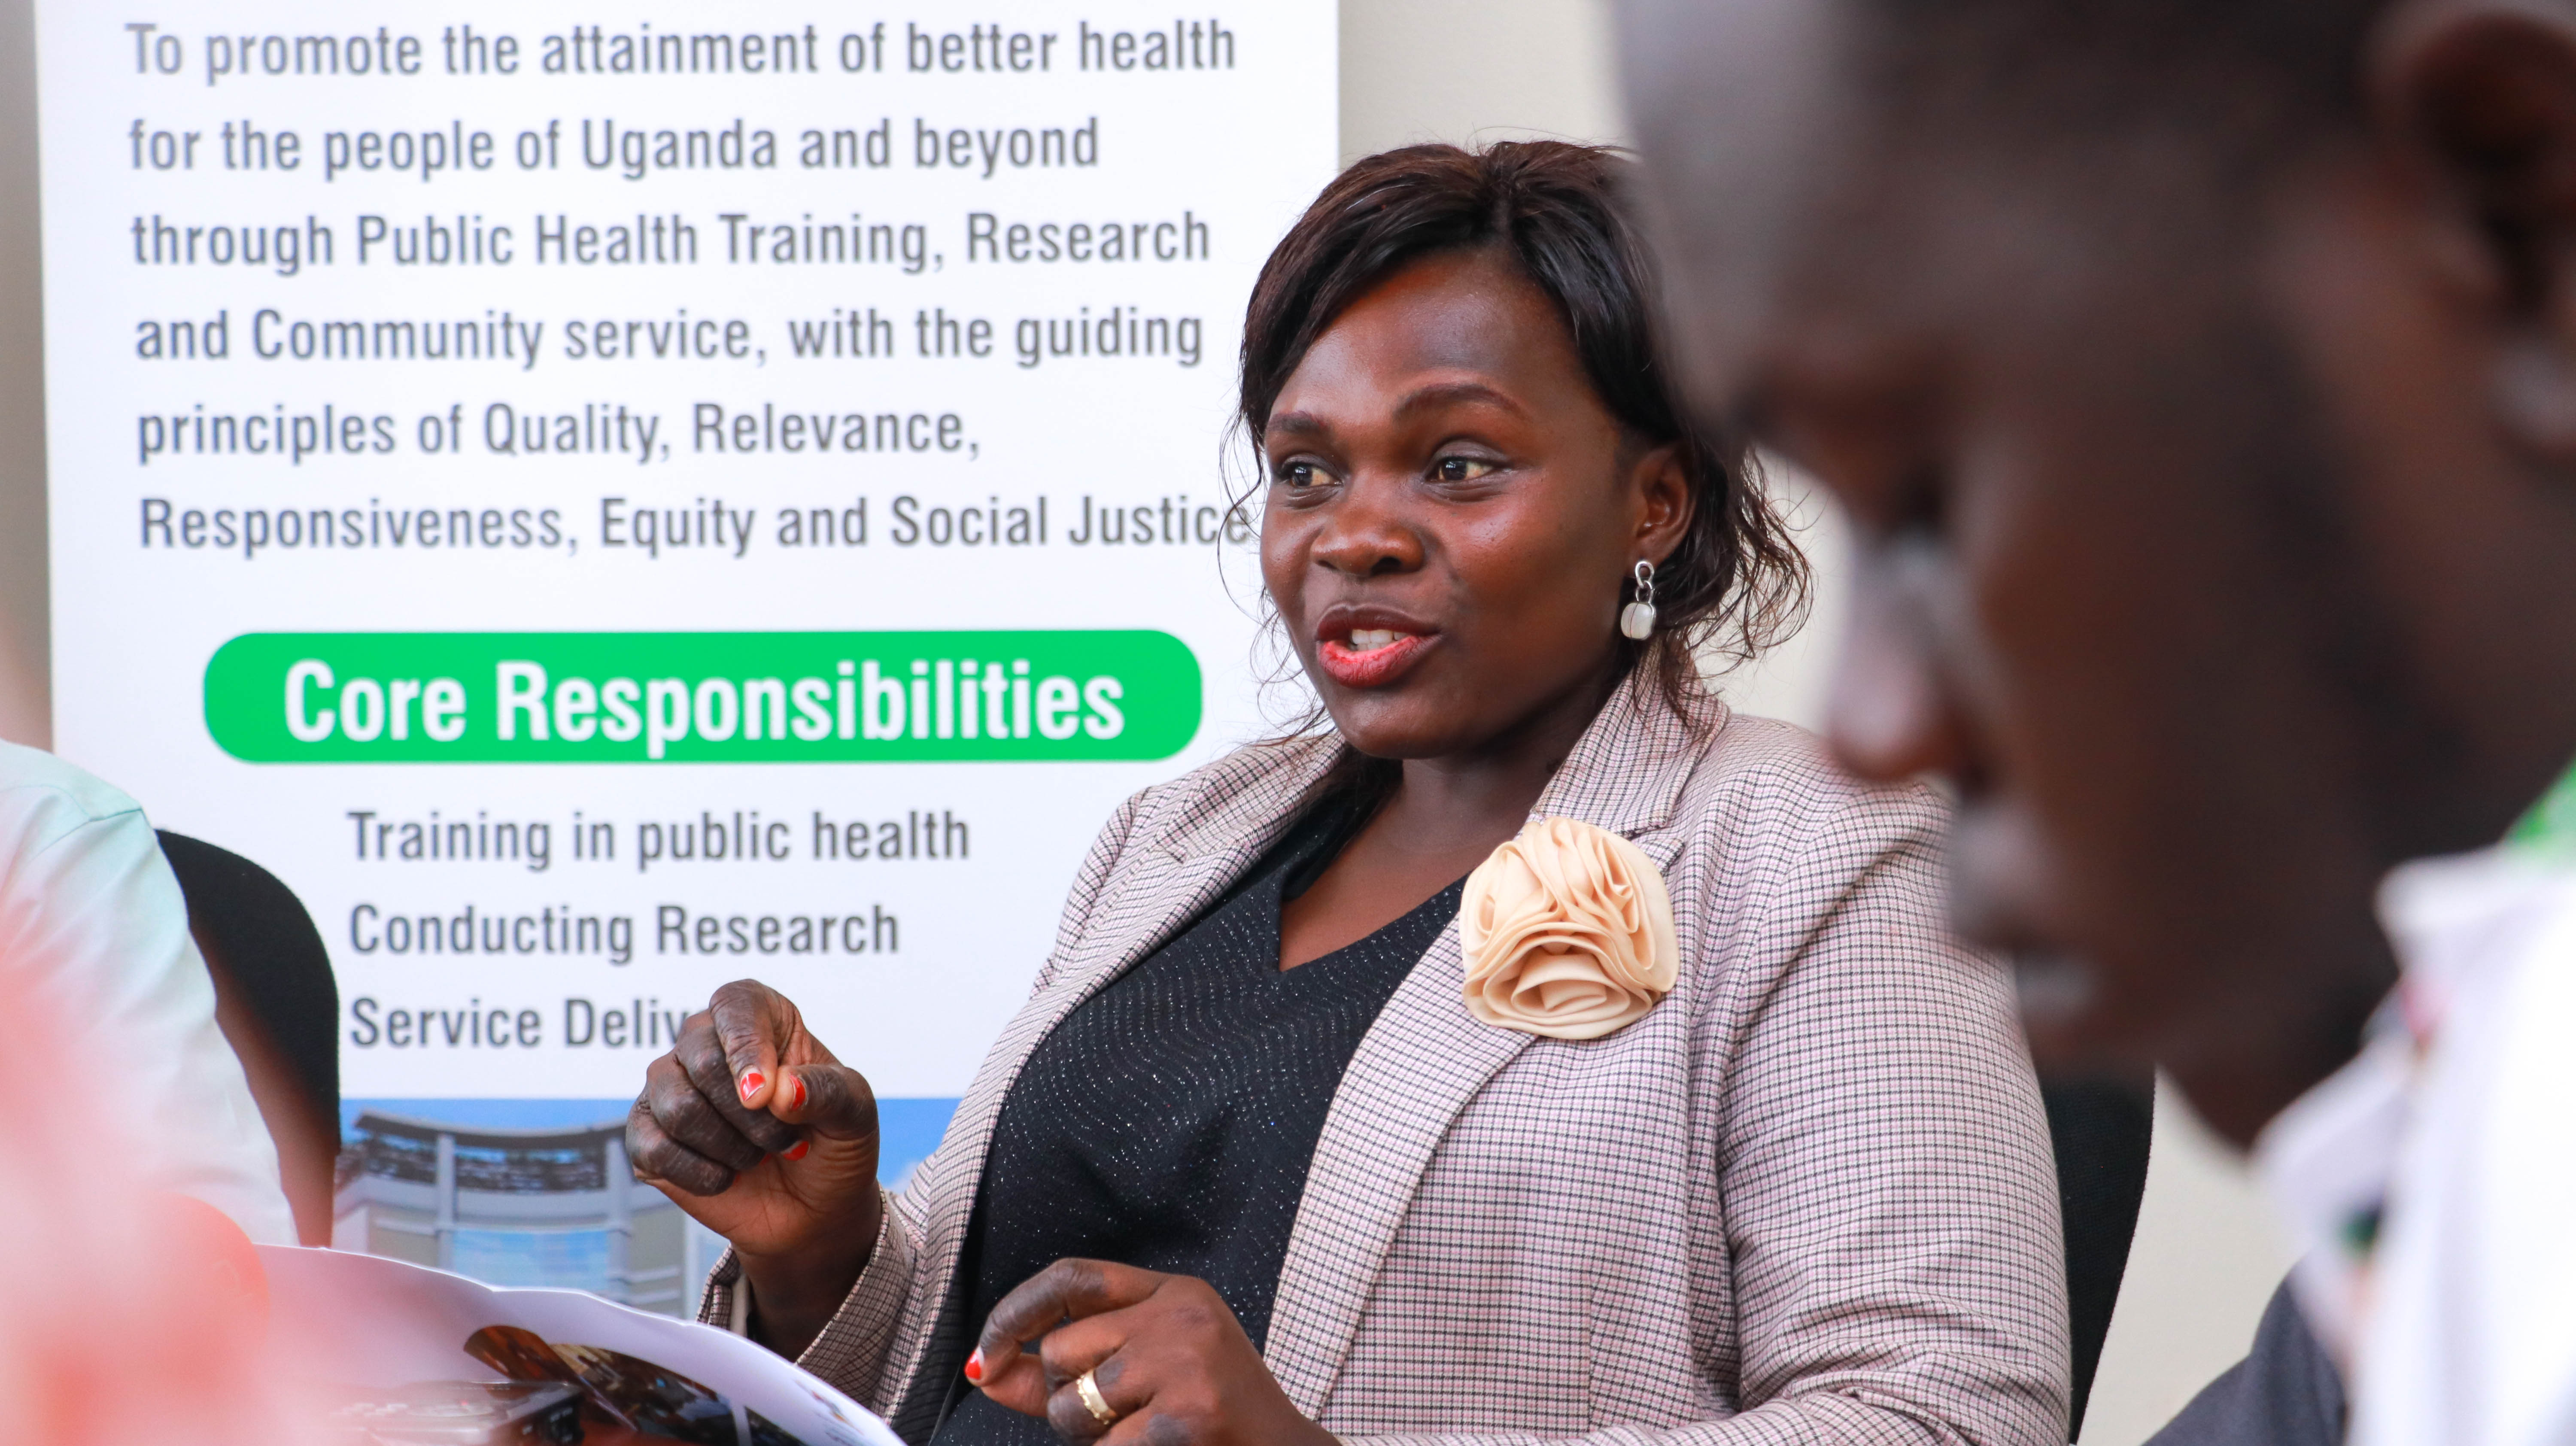 Dr. Suzan Kizito, a researcher in the Department of Disease Control and Environmental Health Science, at MakSPH